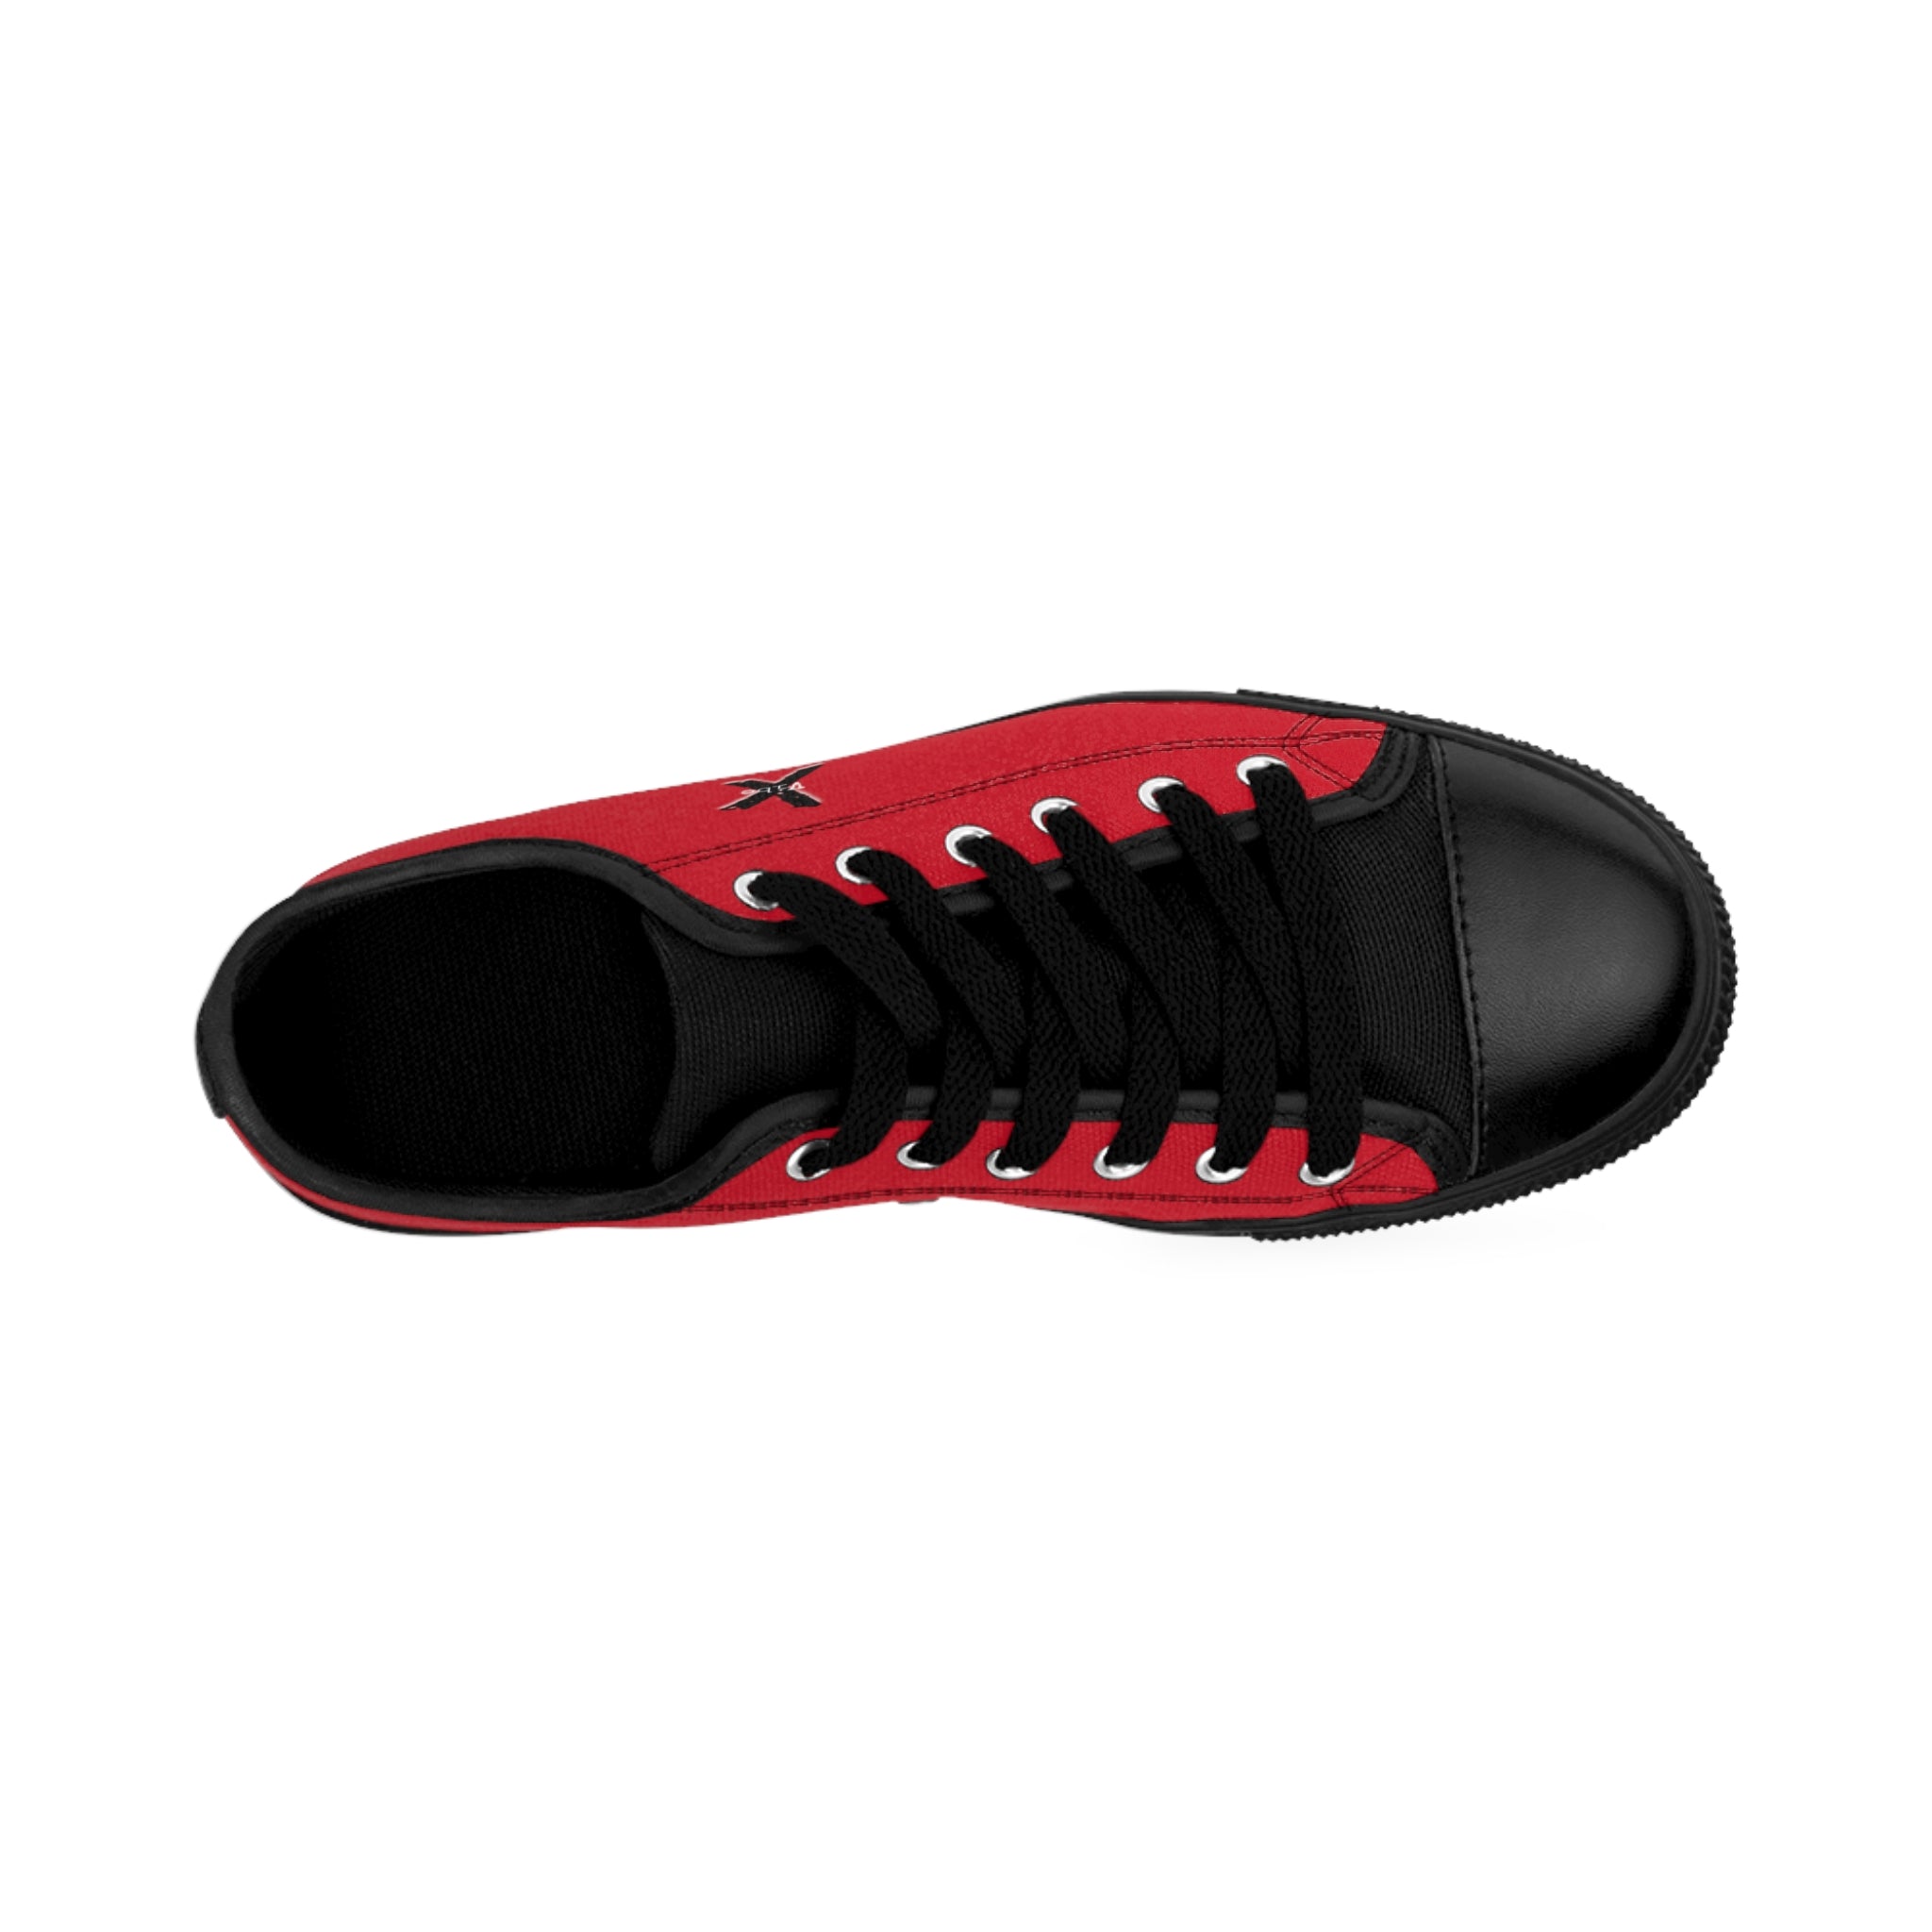 X-Vibe Women's Sneakers (Red/B)